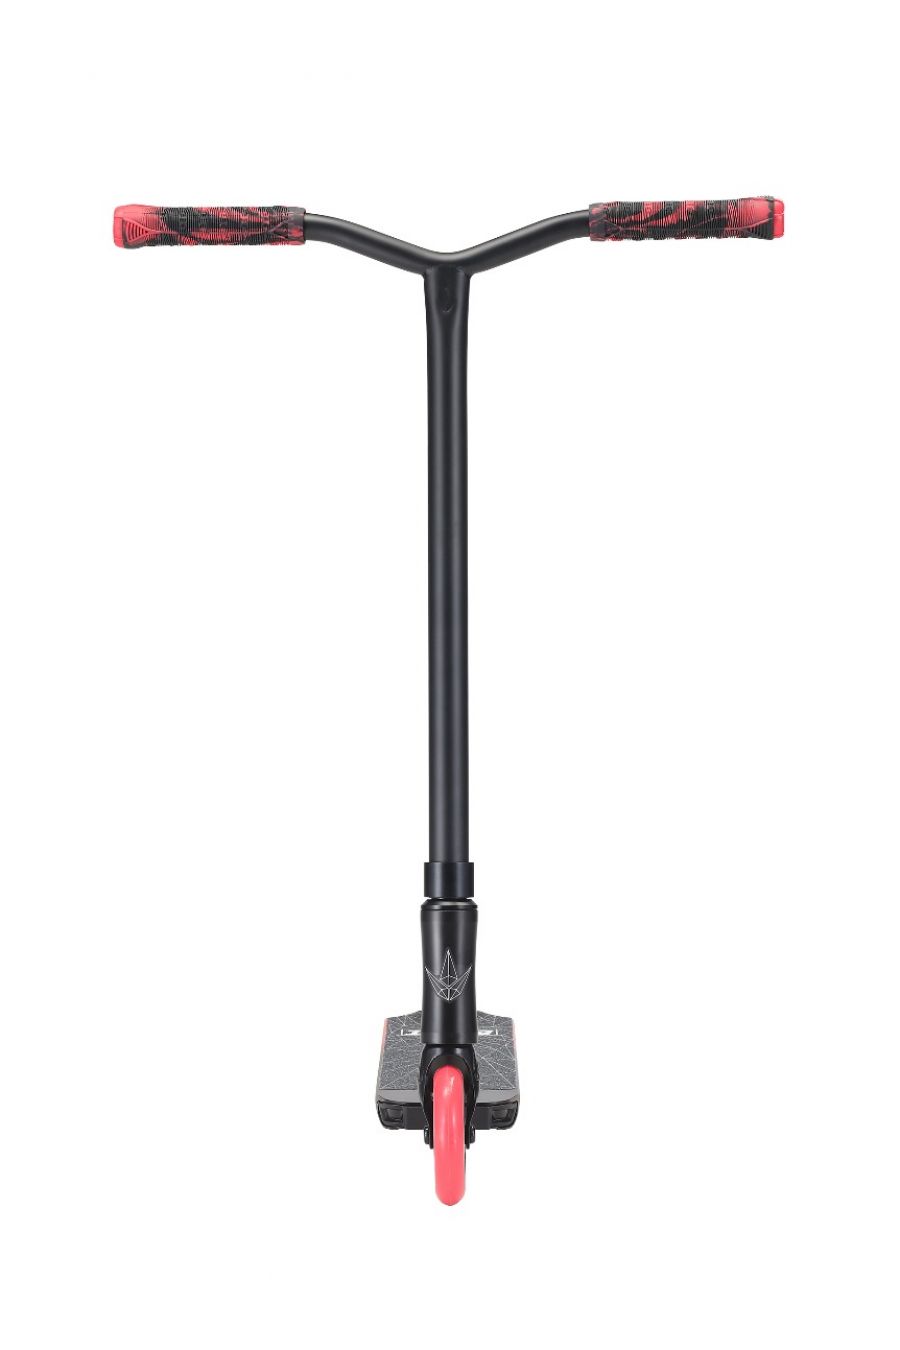 Envy One S3 Complete Scooter (Black / Red)